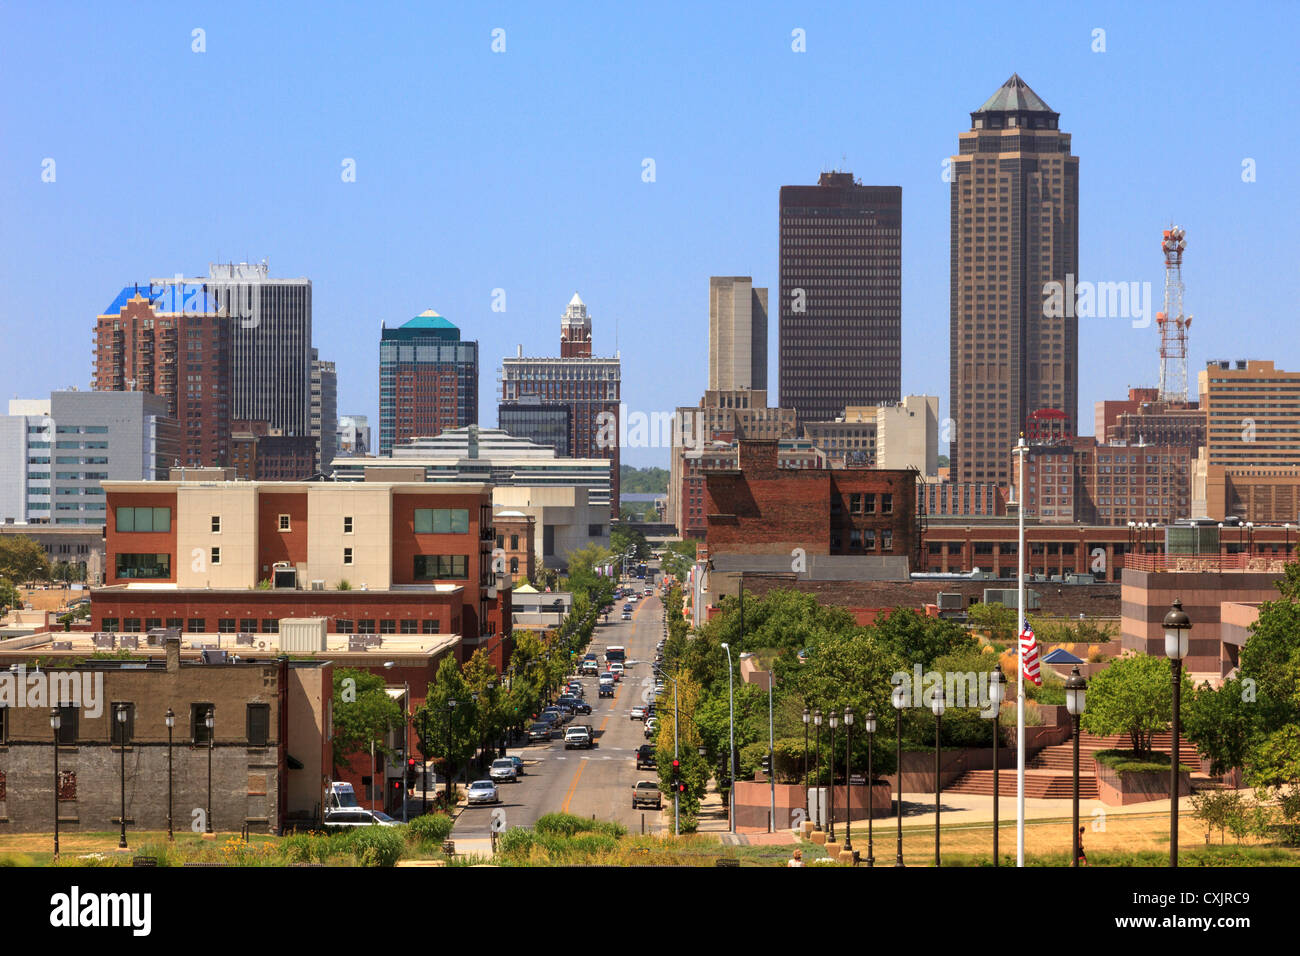 Skyline of downtown Des Moines, Iowa from steps of state capitol building Stock Photo